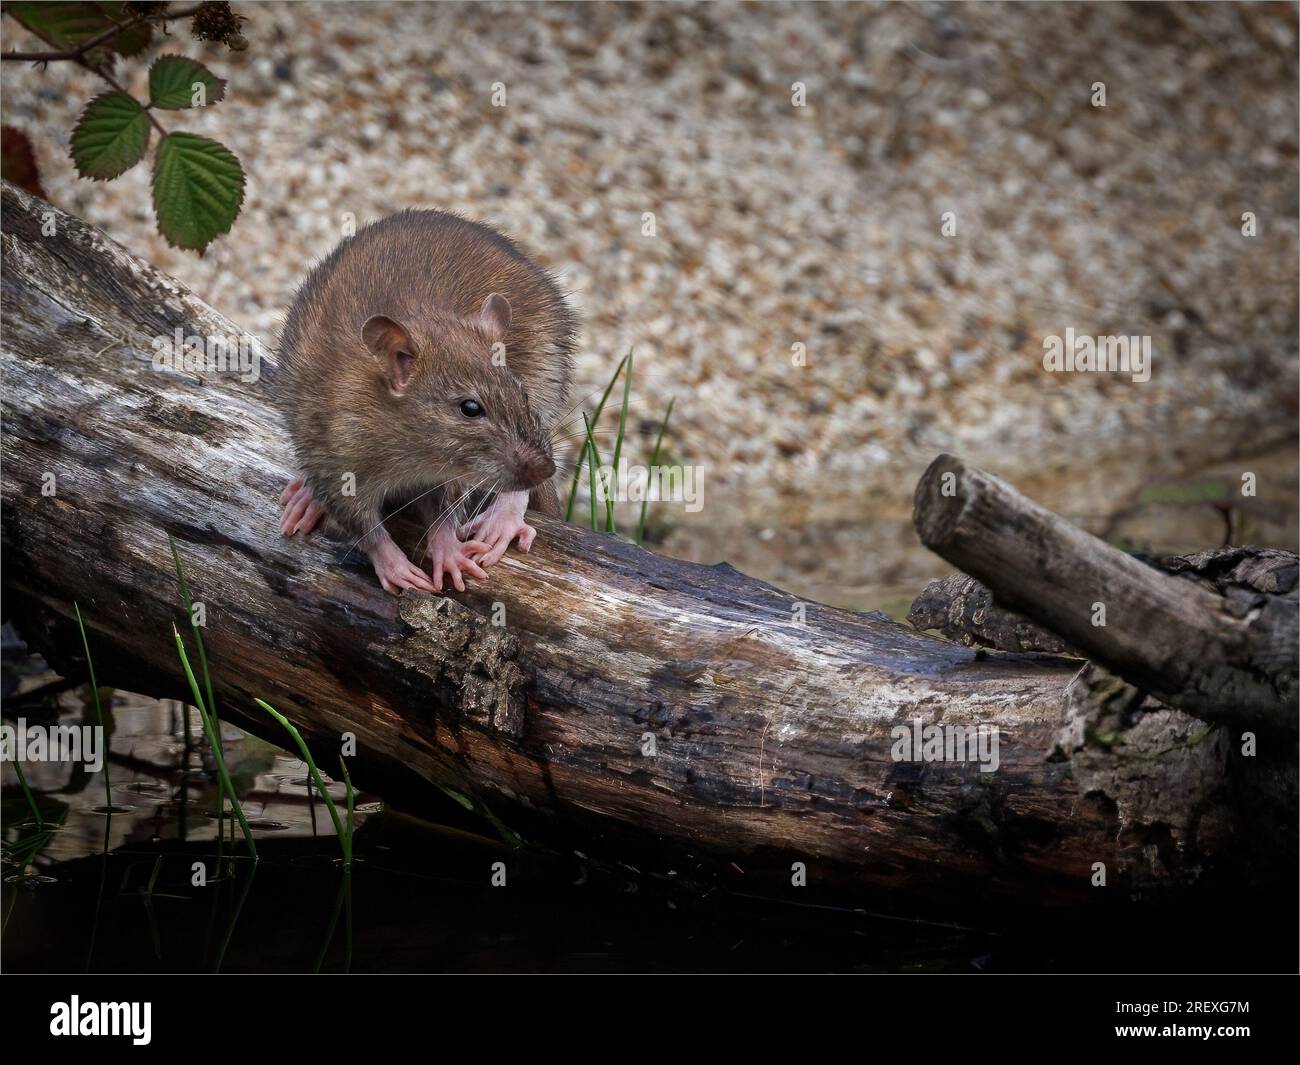 Brown Rat on Log by Pond Stock Photo